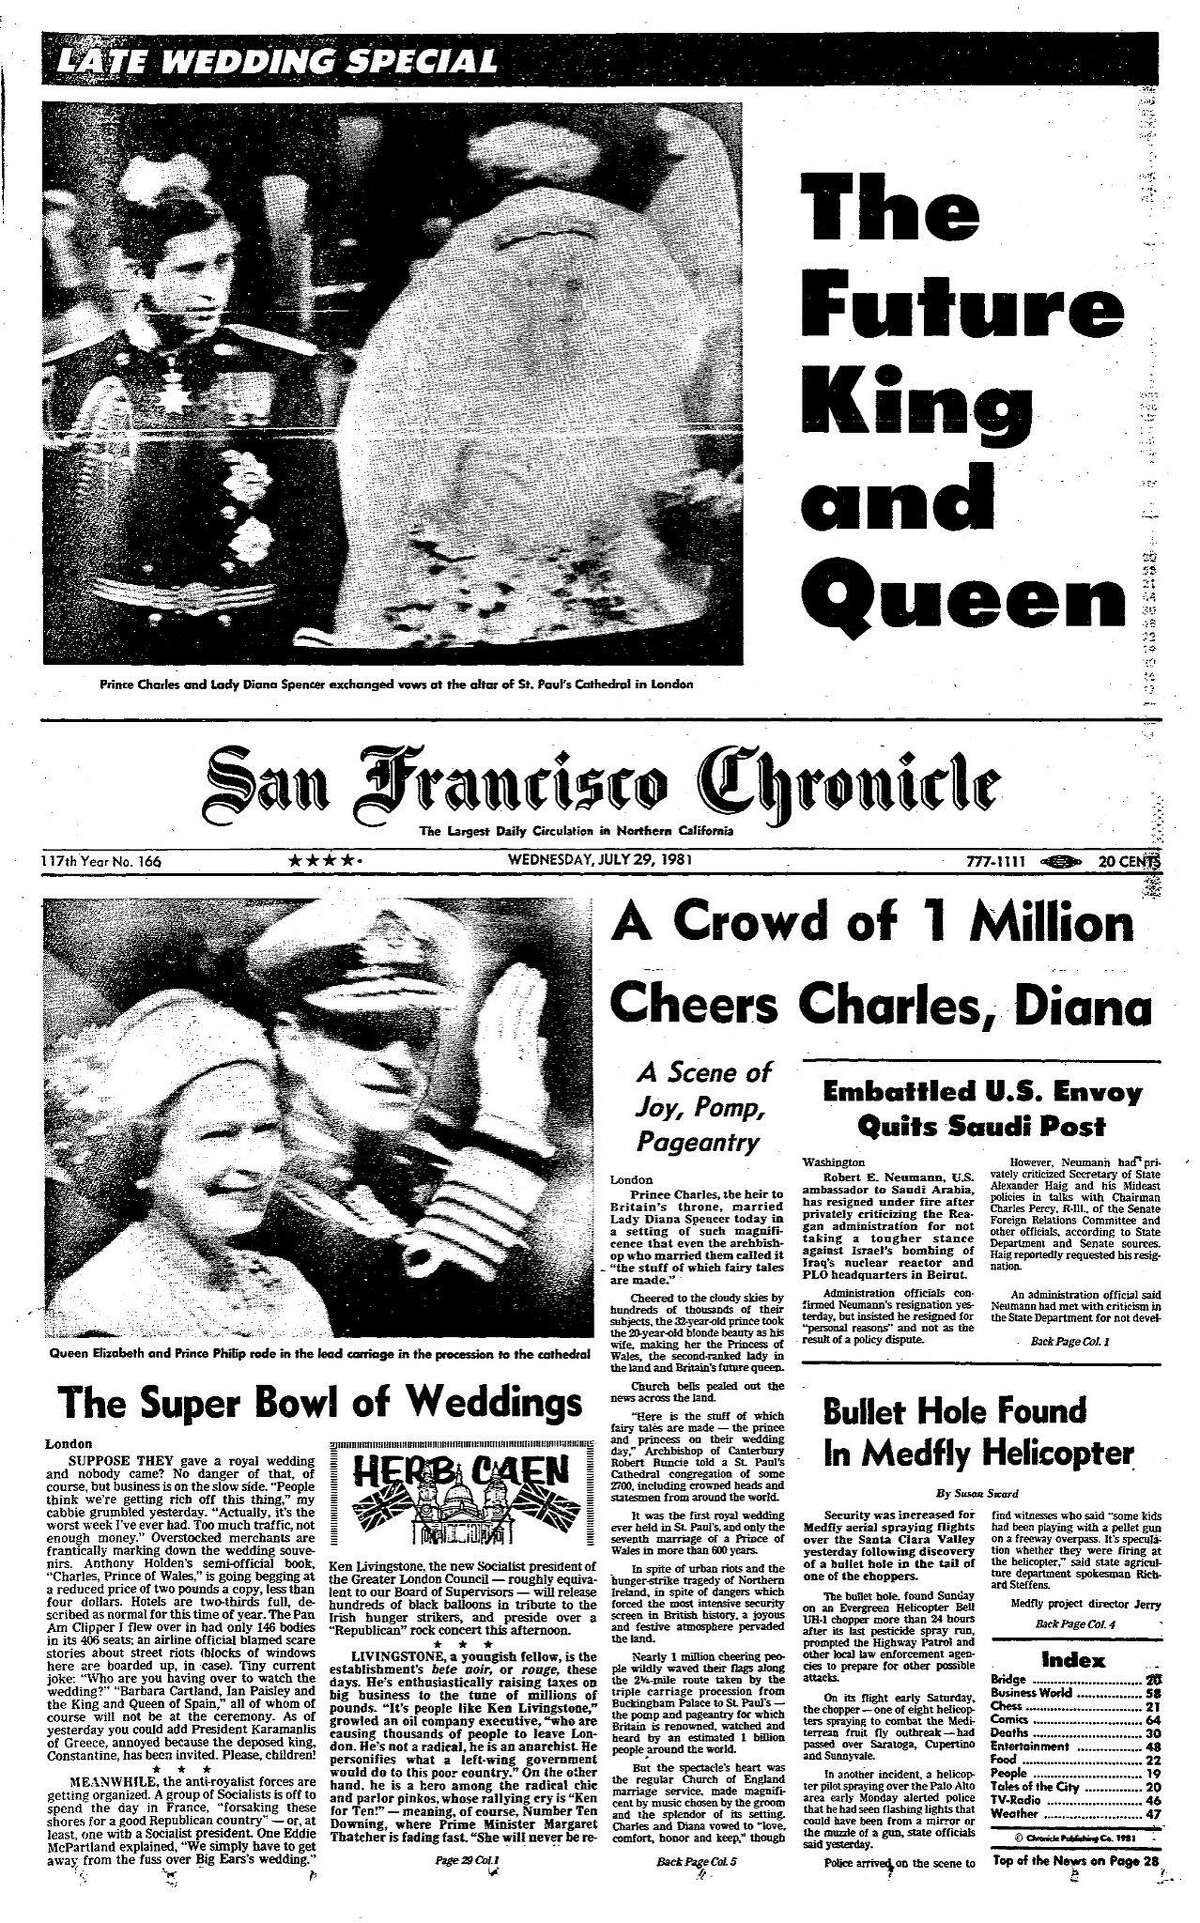 Chronicle Covers Prince Charles Lady Diana — And Herb Caen